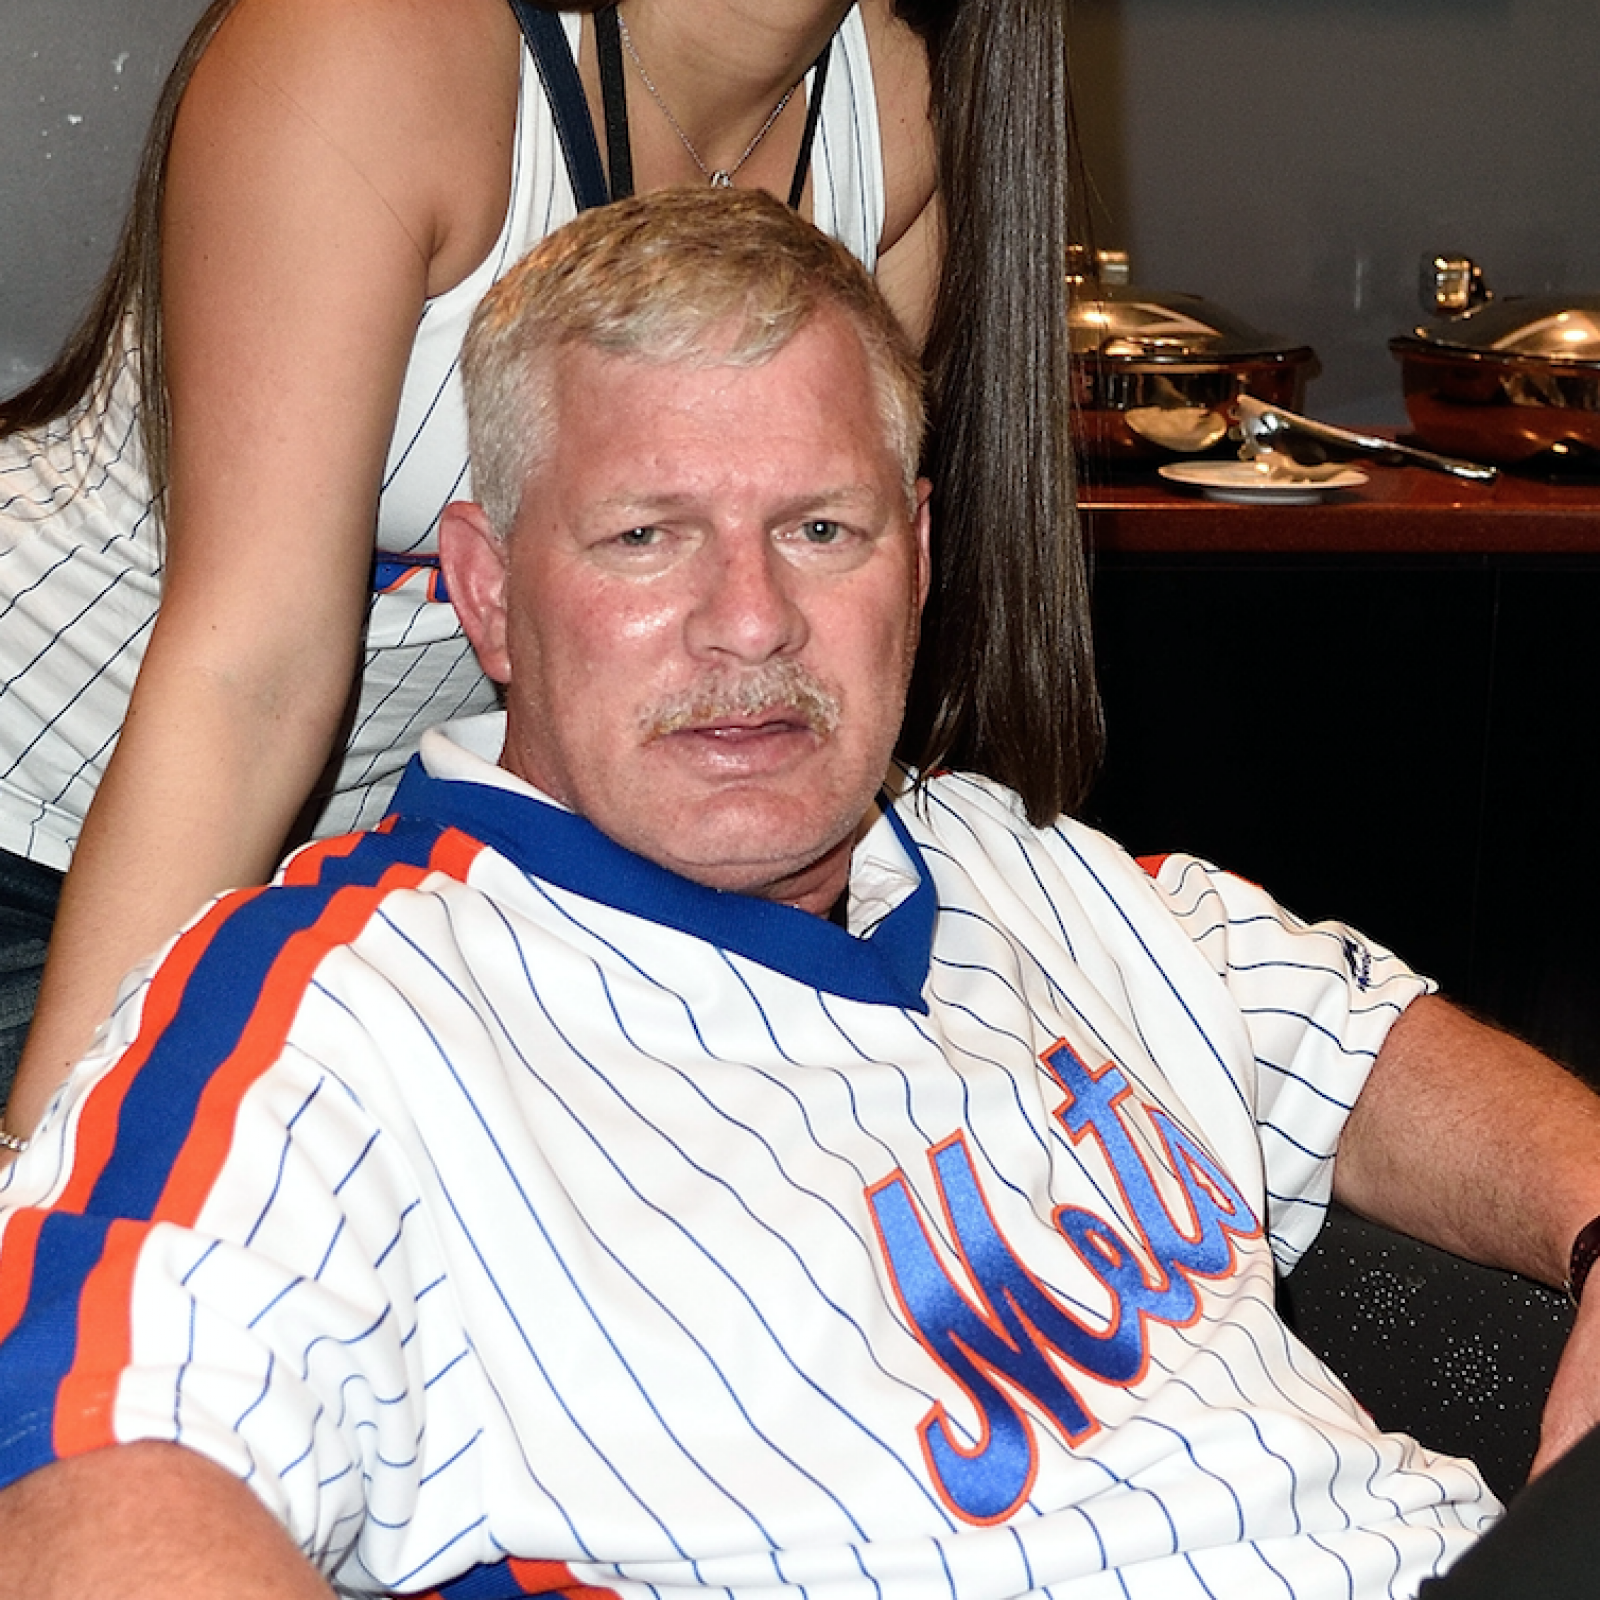 Lenny Dykstra's Creepy Sexual Tweets to Lena Dunham Were Not Out